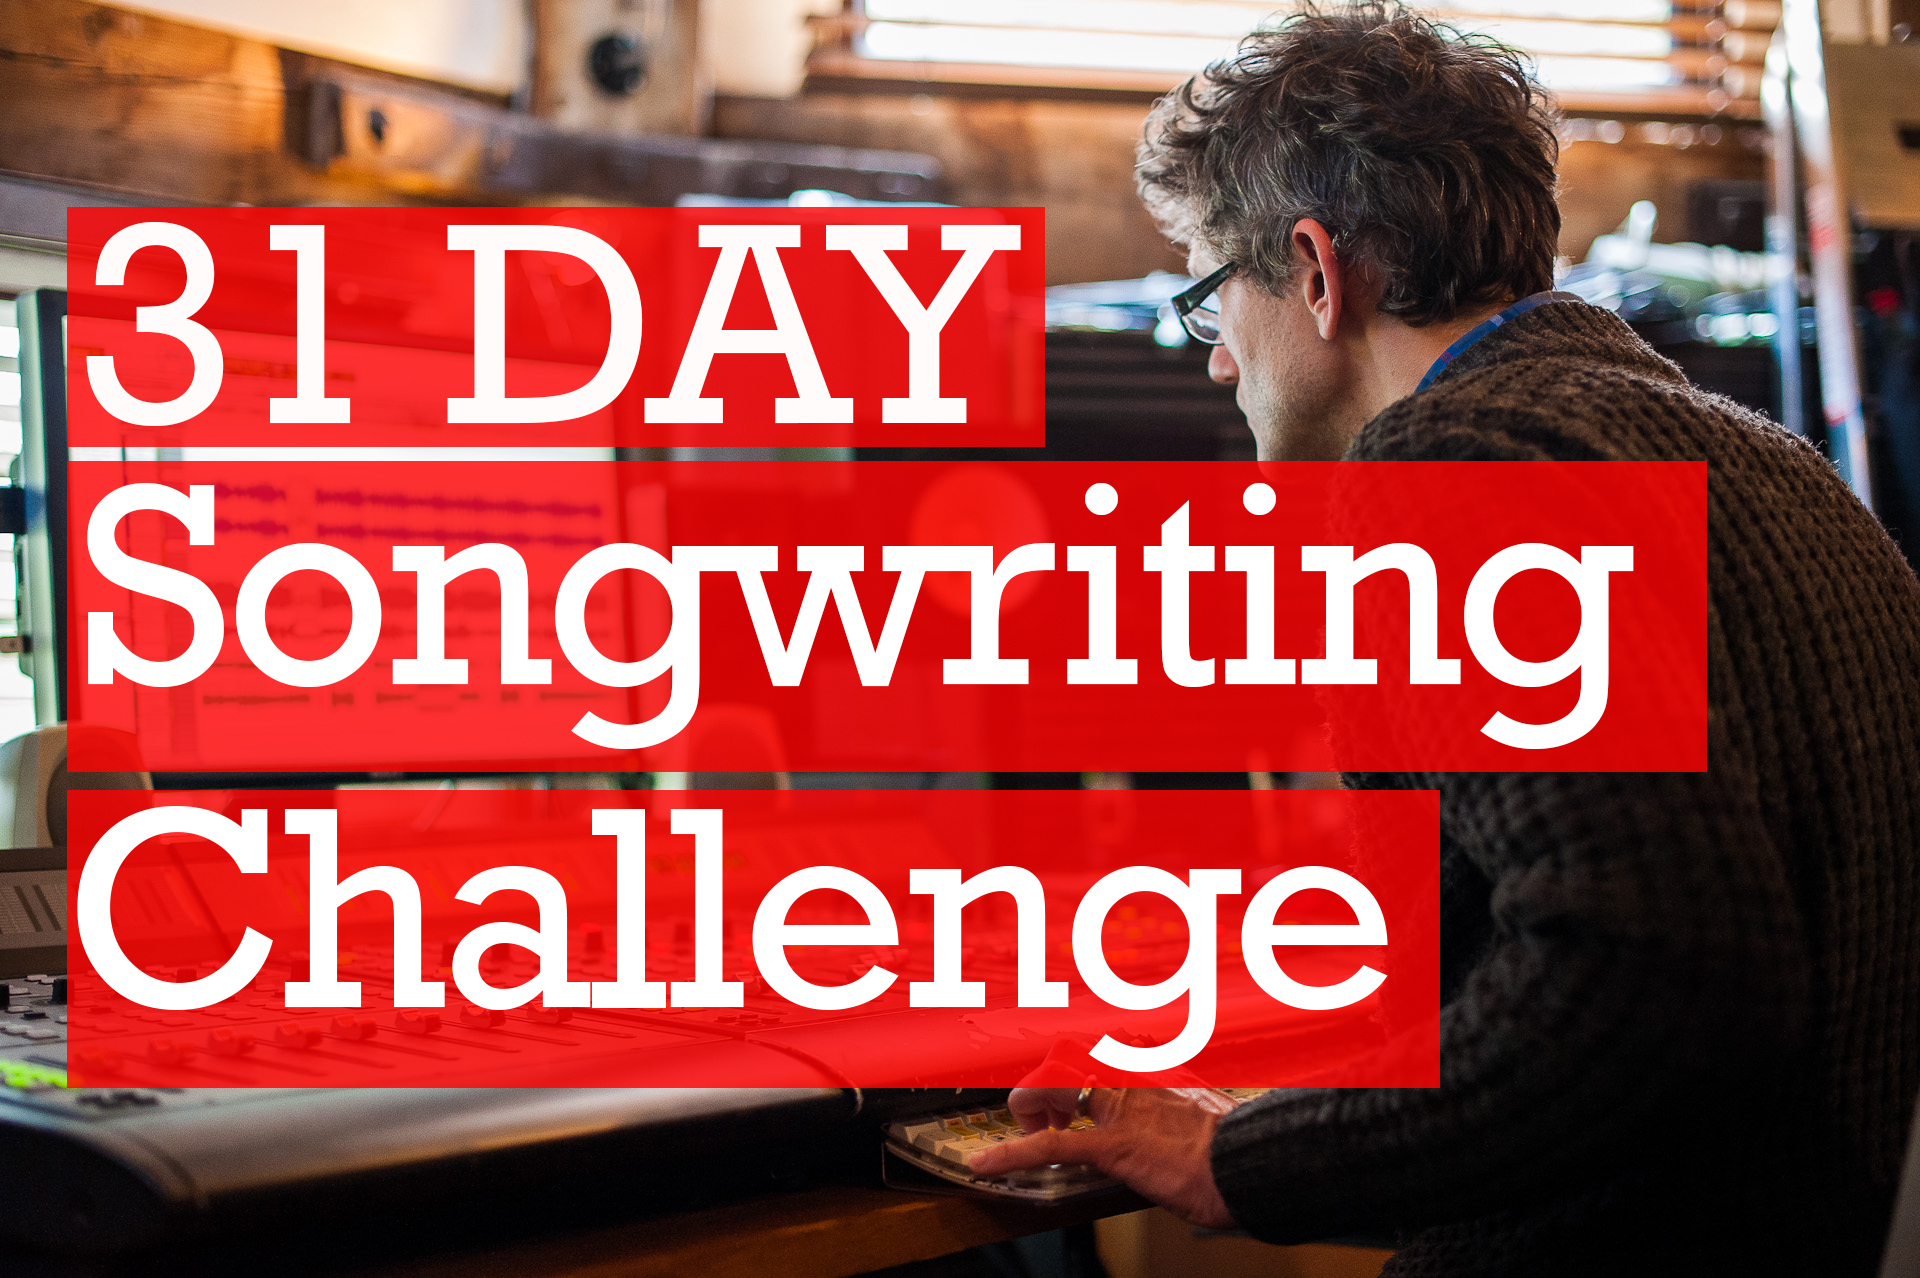 Join My Songwriting Challenge: 1 Song Per Day For 31 Days